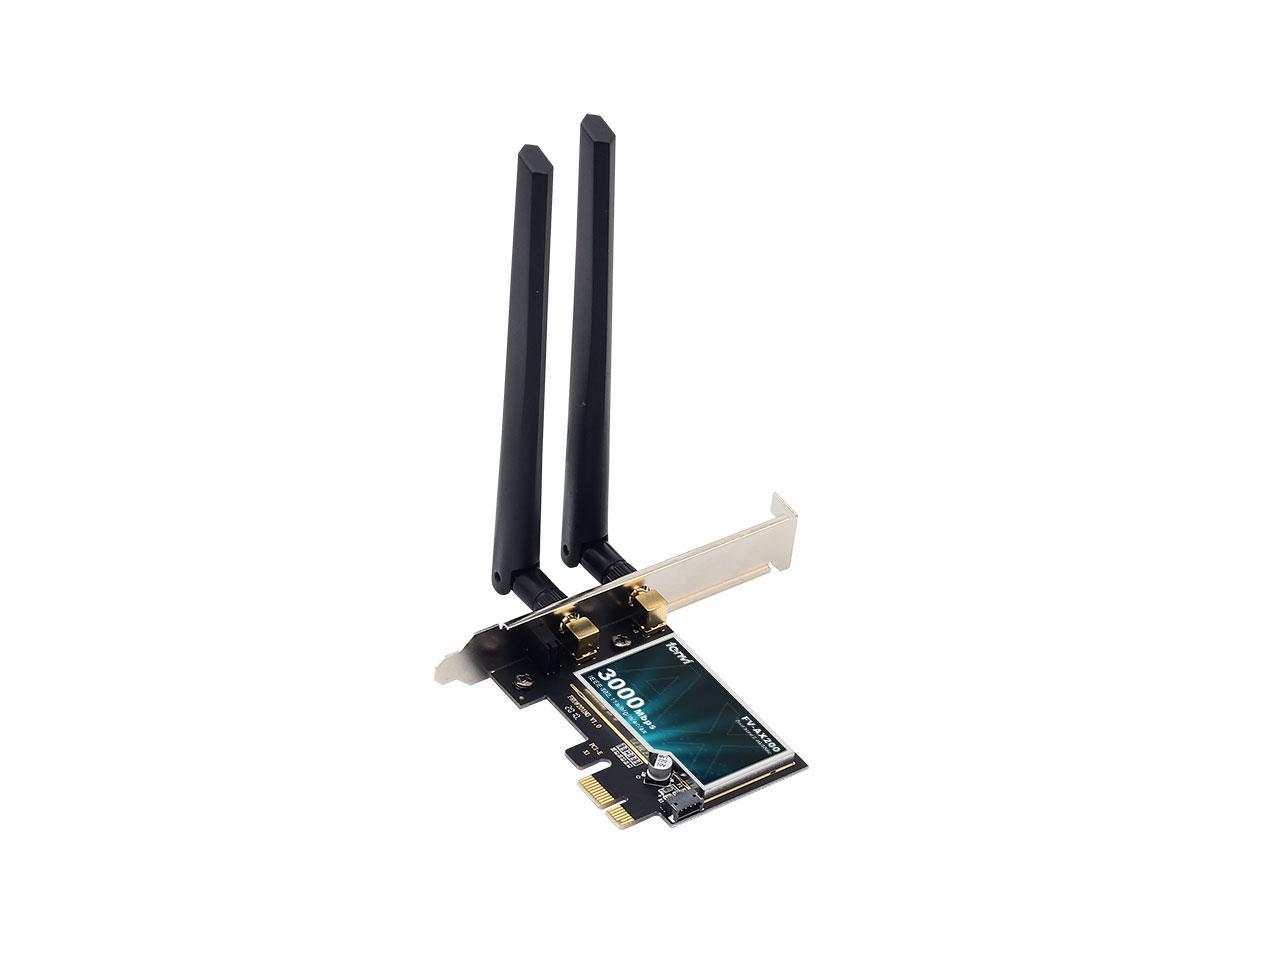 Ubit Pcie WLAN Card 1800 Mbit/s WiFi 6 AX200 PCIe Network Card 802.11 AX/AC PCI E WLAN Adapter with Bluetooth Ultra-Low Latency Support Win 10/11